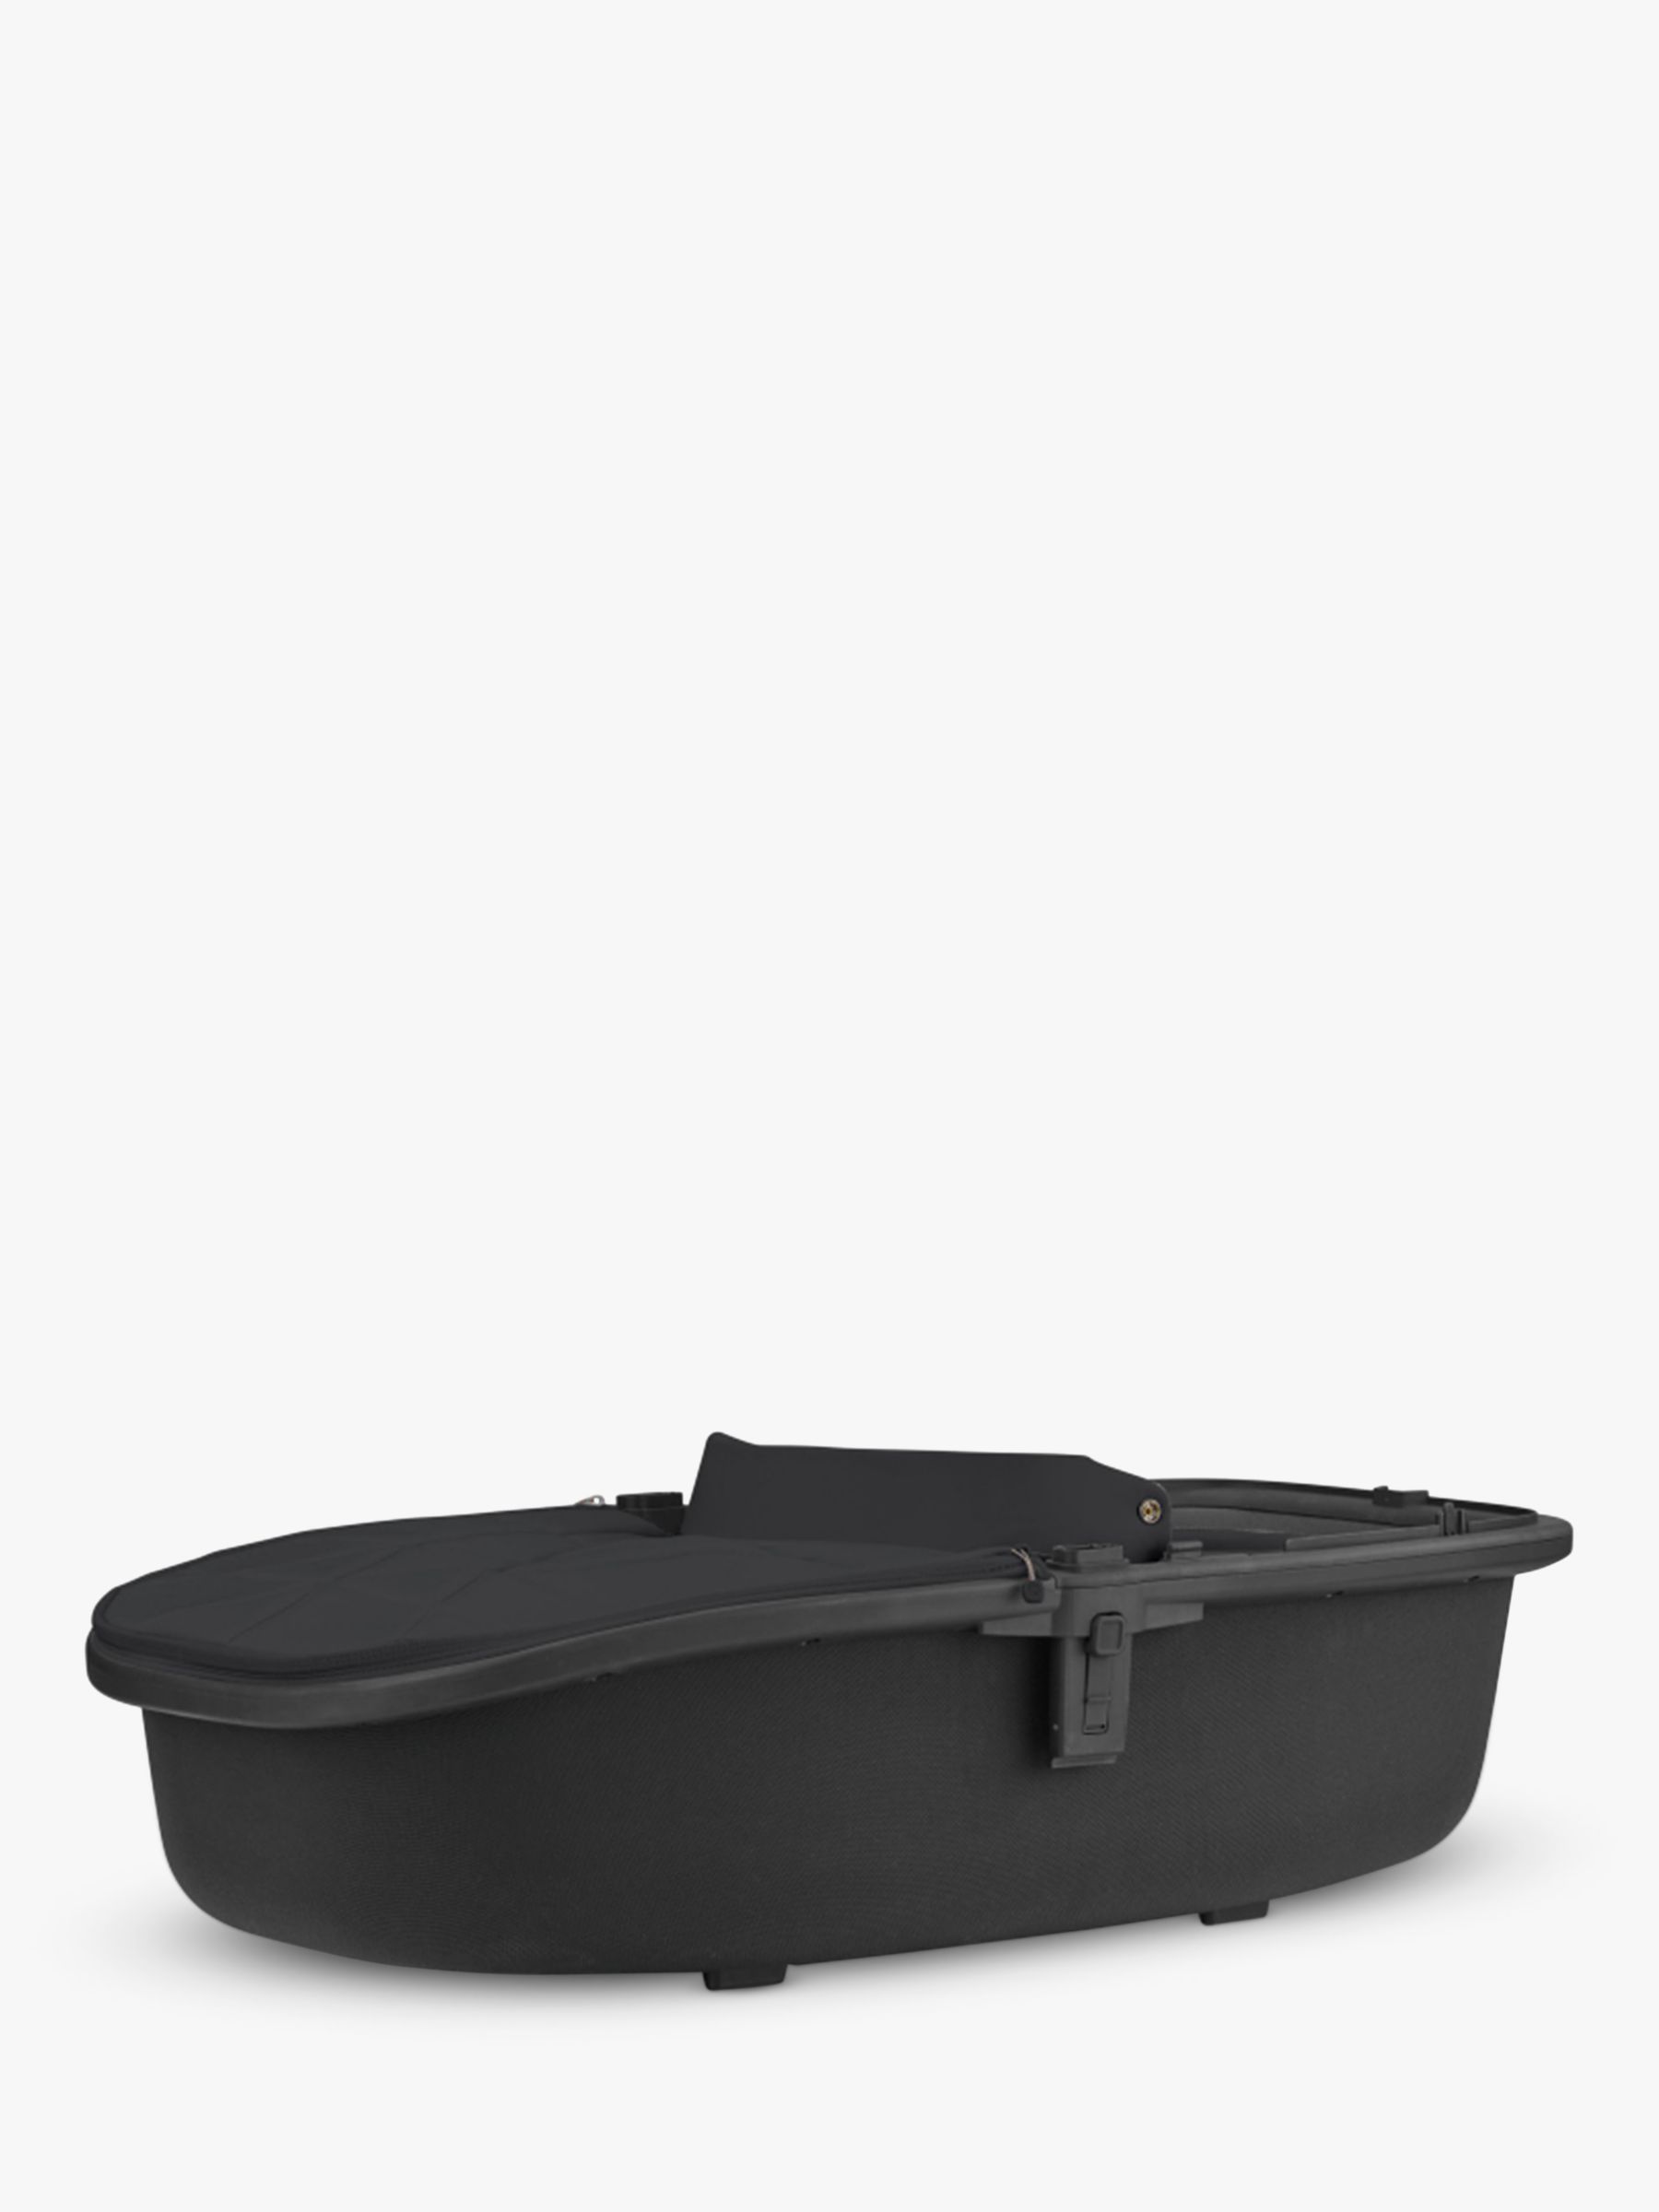 Image of Quinny Hux Carrycot Black on Black